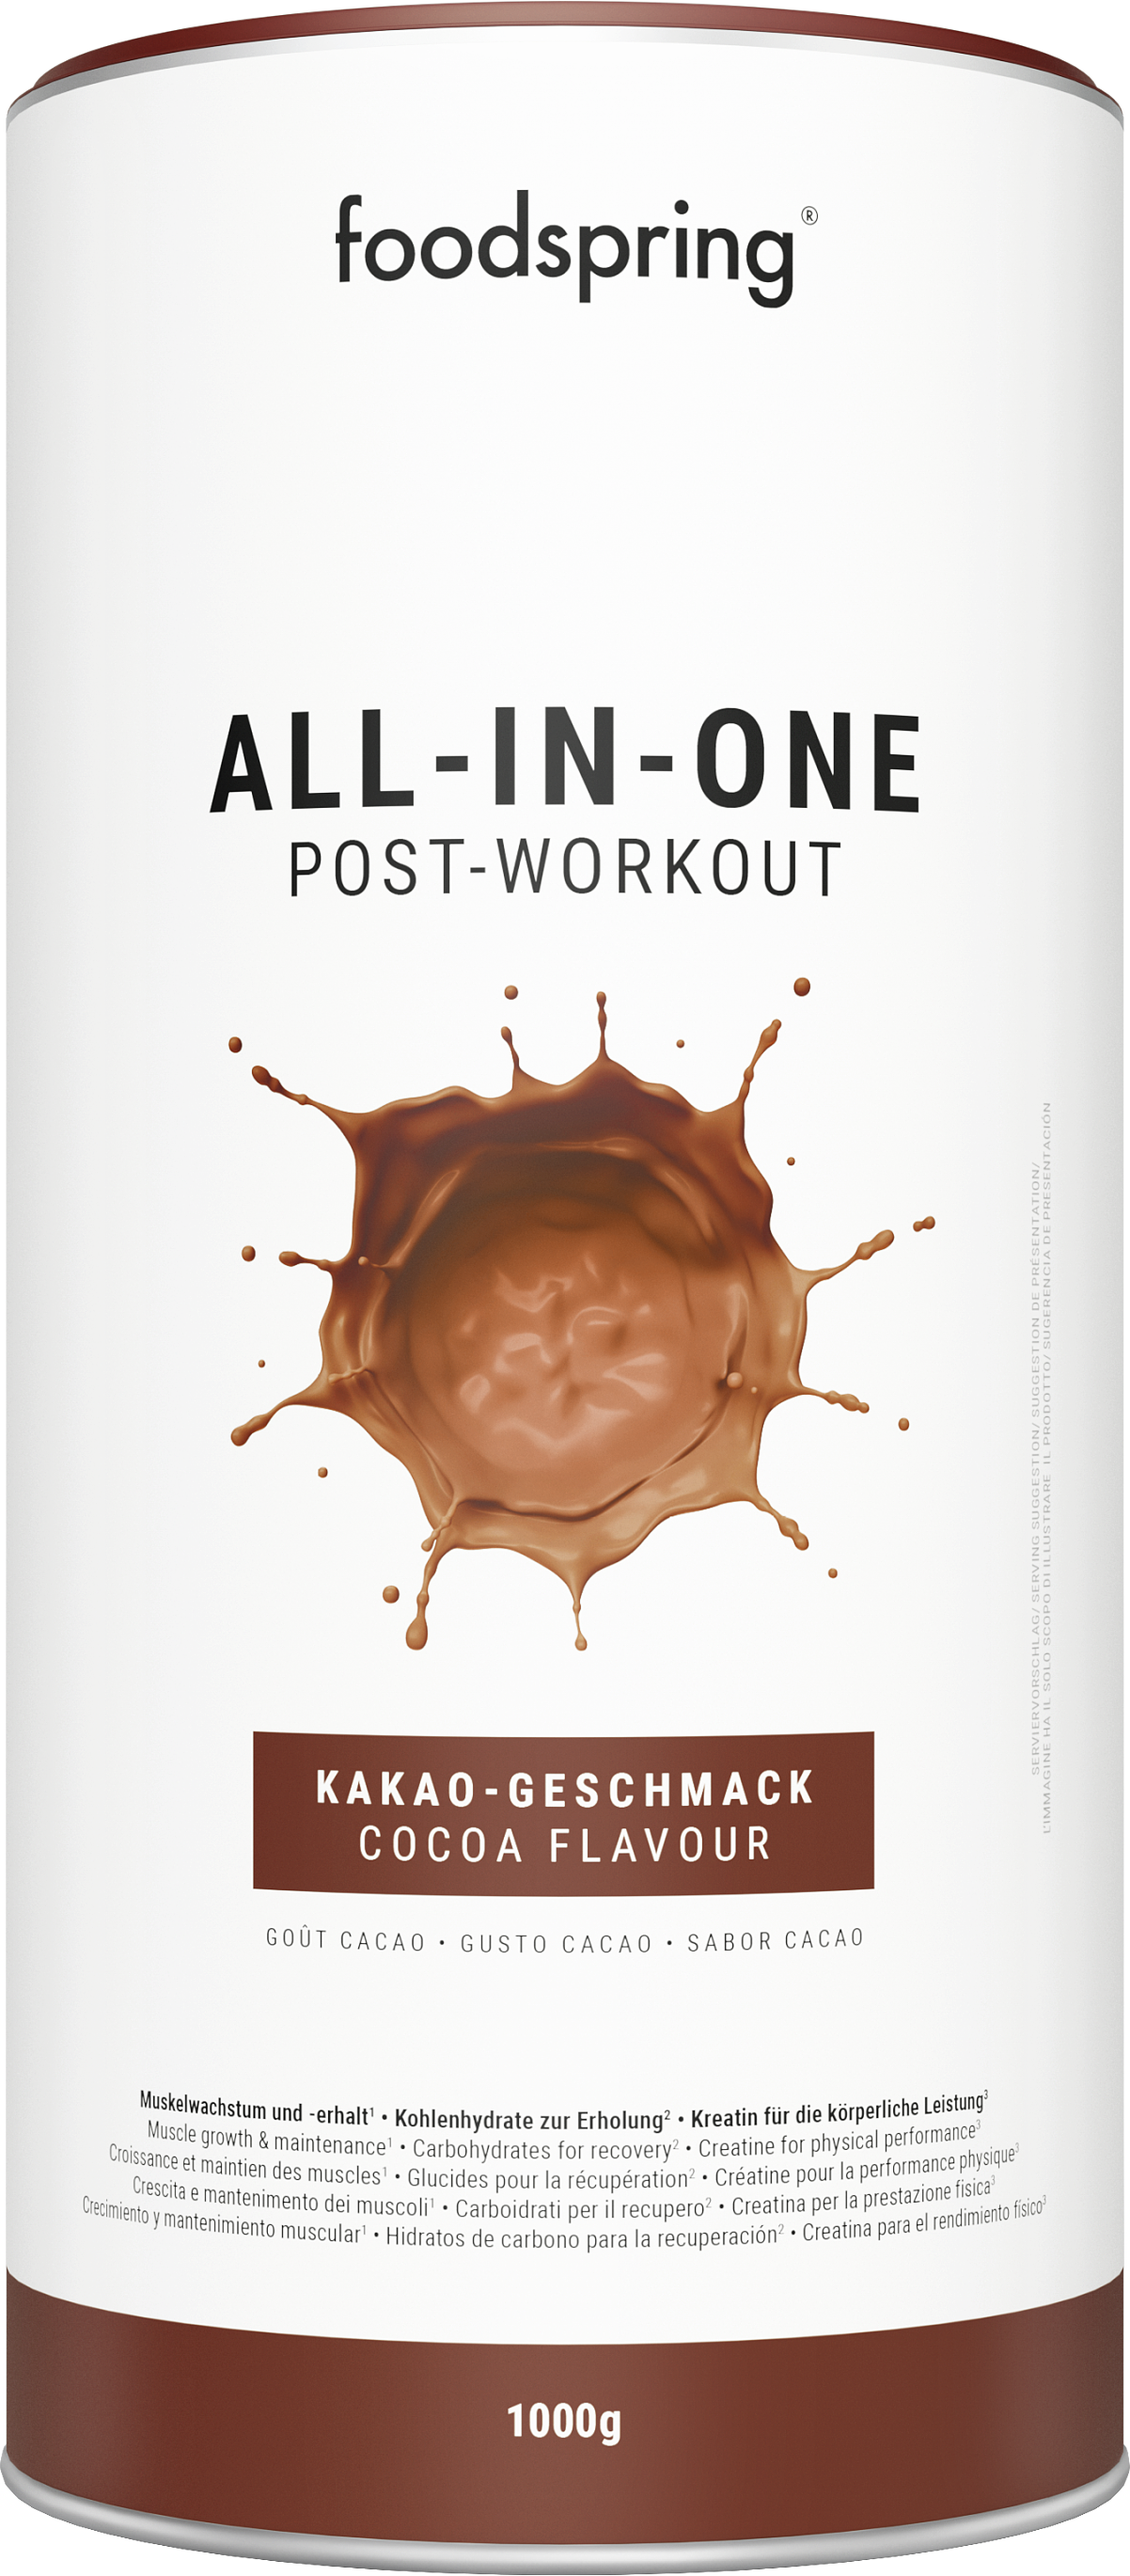 foodspring – All-in-One Post-Workout_Kakao Geschmack_EUR 39,99